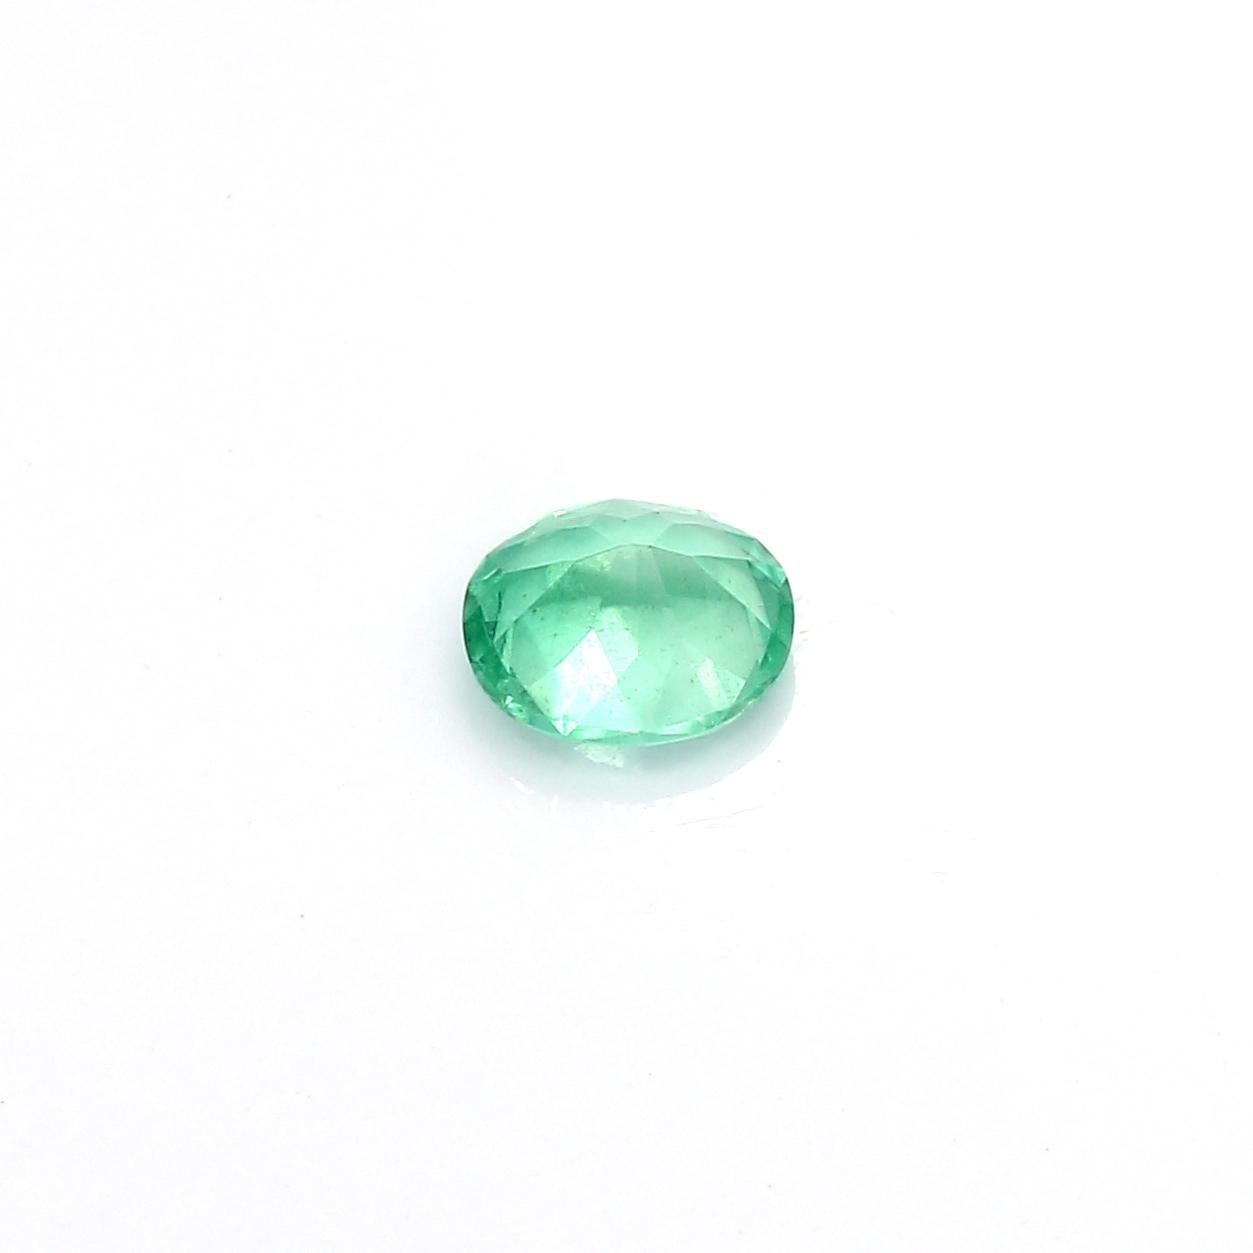 An amazing Russian Emerald which allows jewelers to create a unique piece of wearable art.
This exceptional quality gemstone would make a custom-made jewelry design. Perfect for a Ring or Pendant.

Shape - Oval
Weight - 0.53 ct
Treatment - 